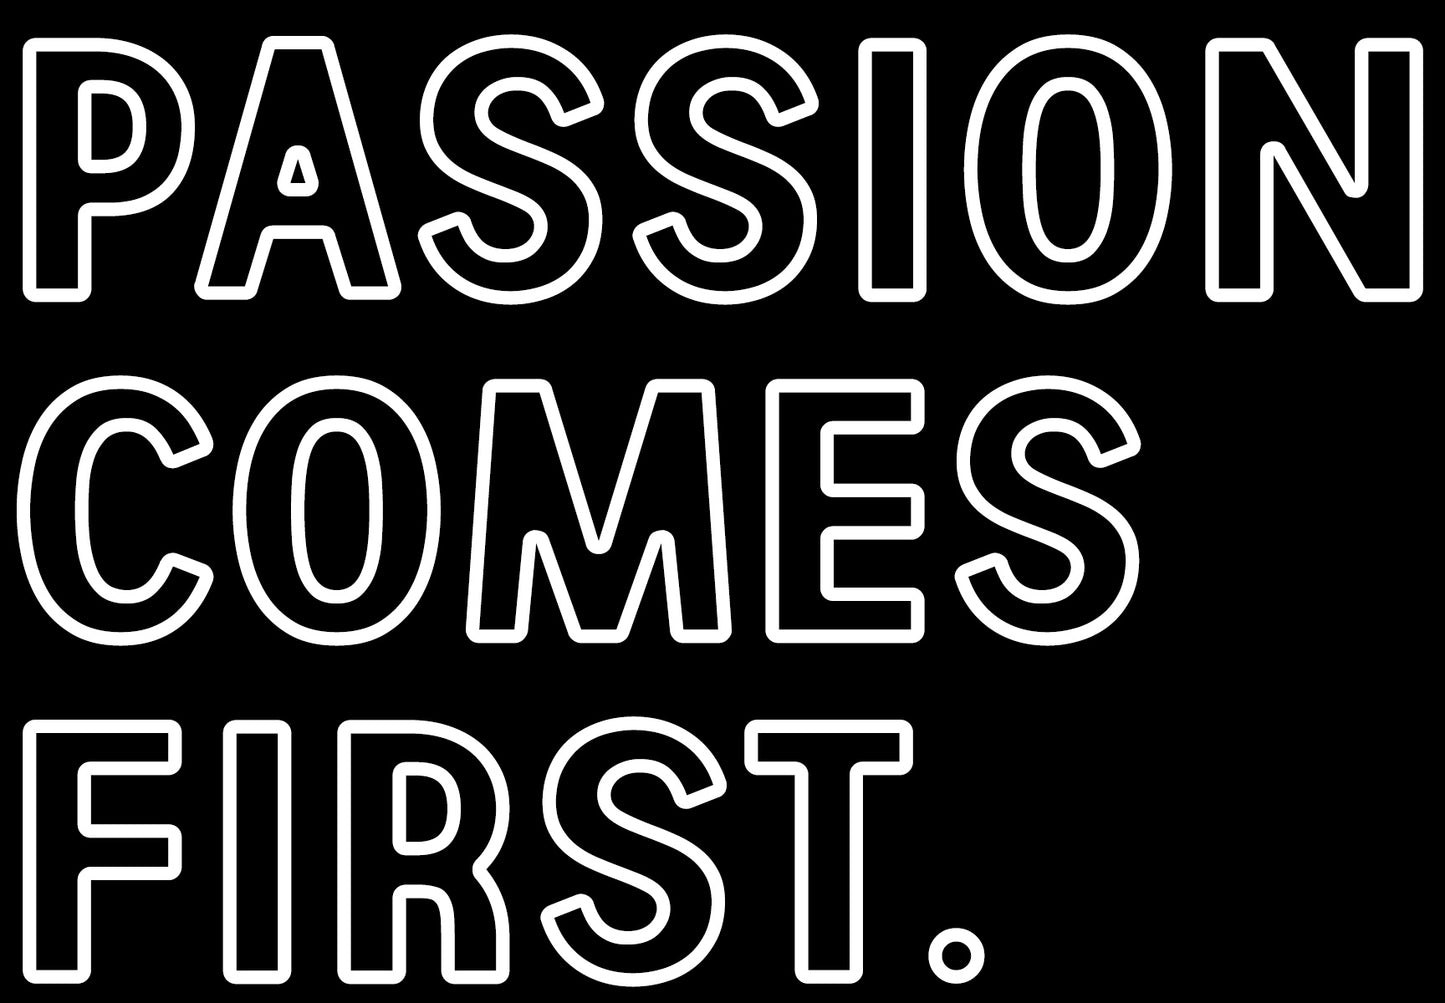 passion comes first neon sign